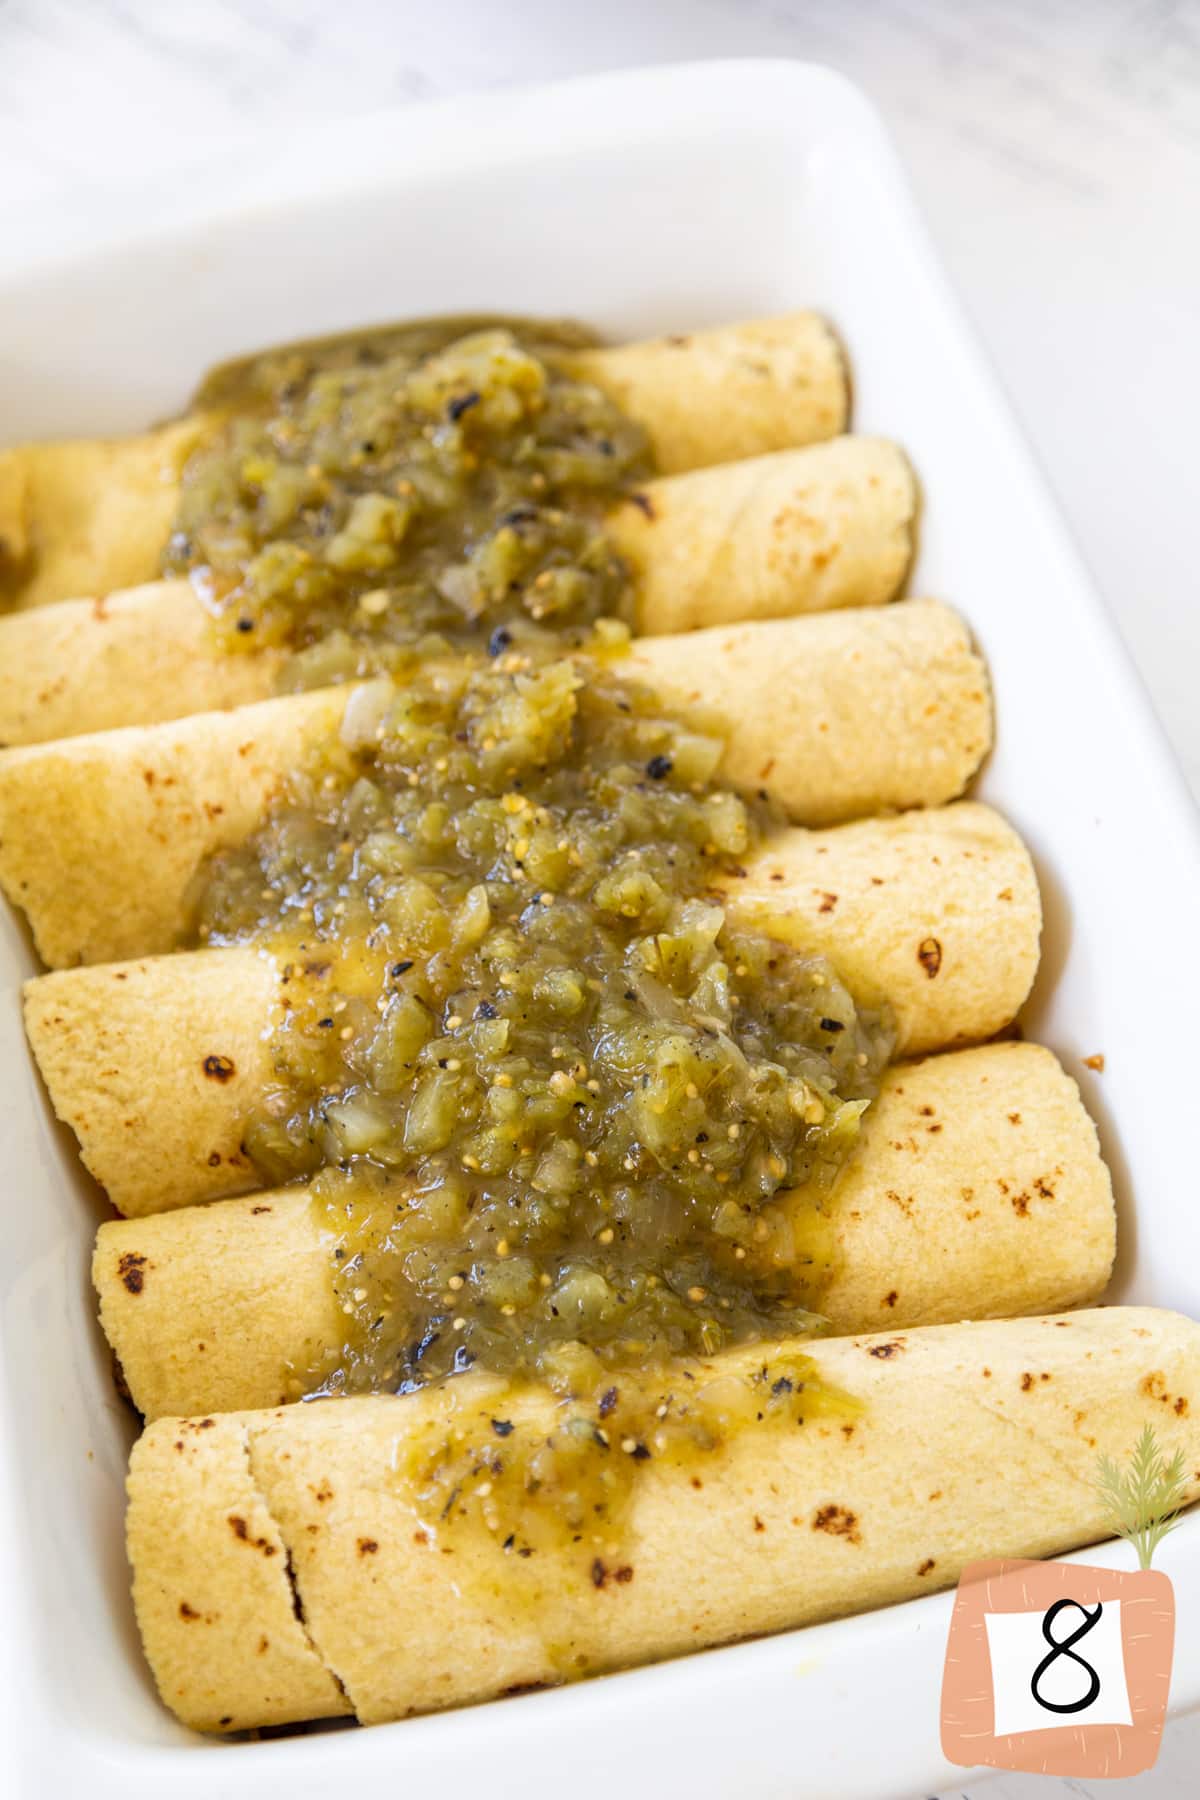 Rolled up corn tortillas with green salsa poured over the top.